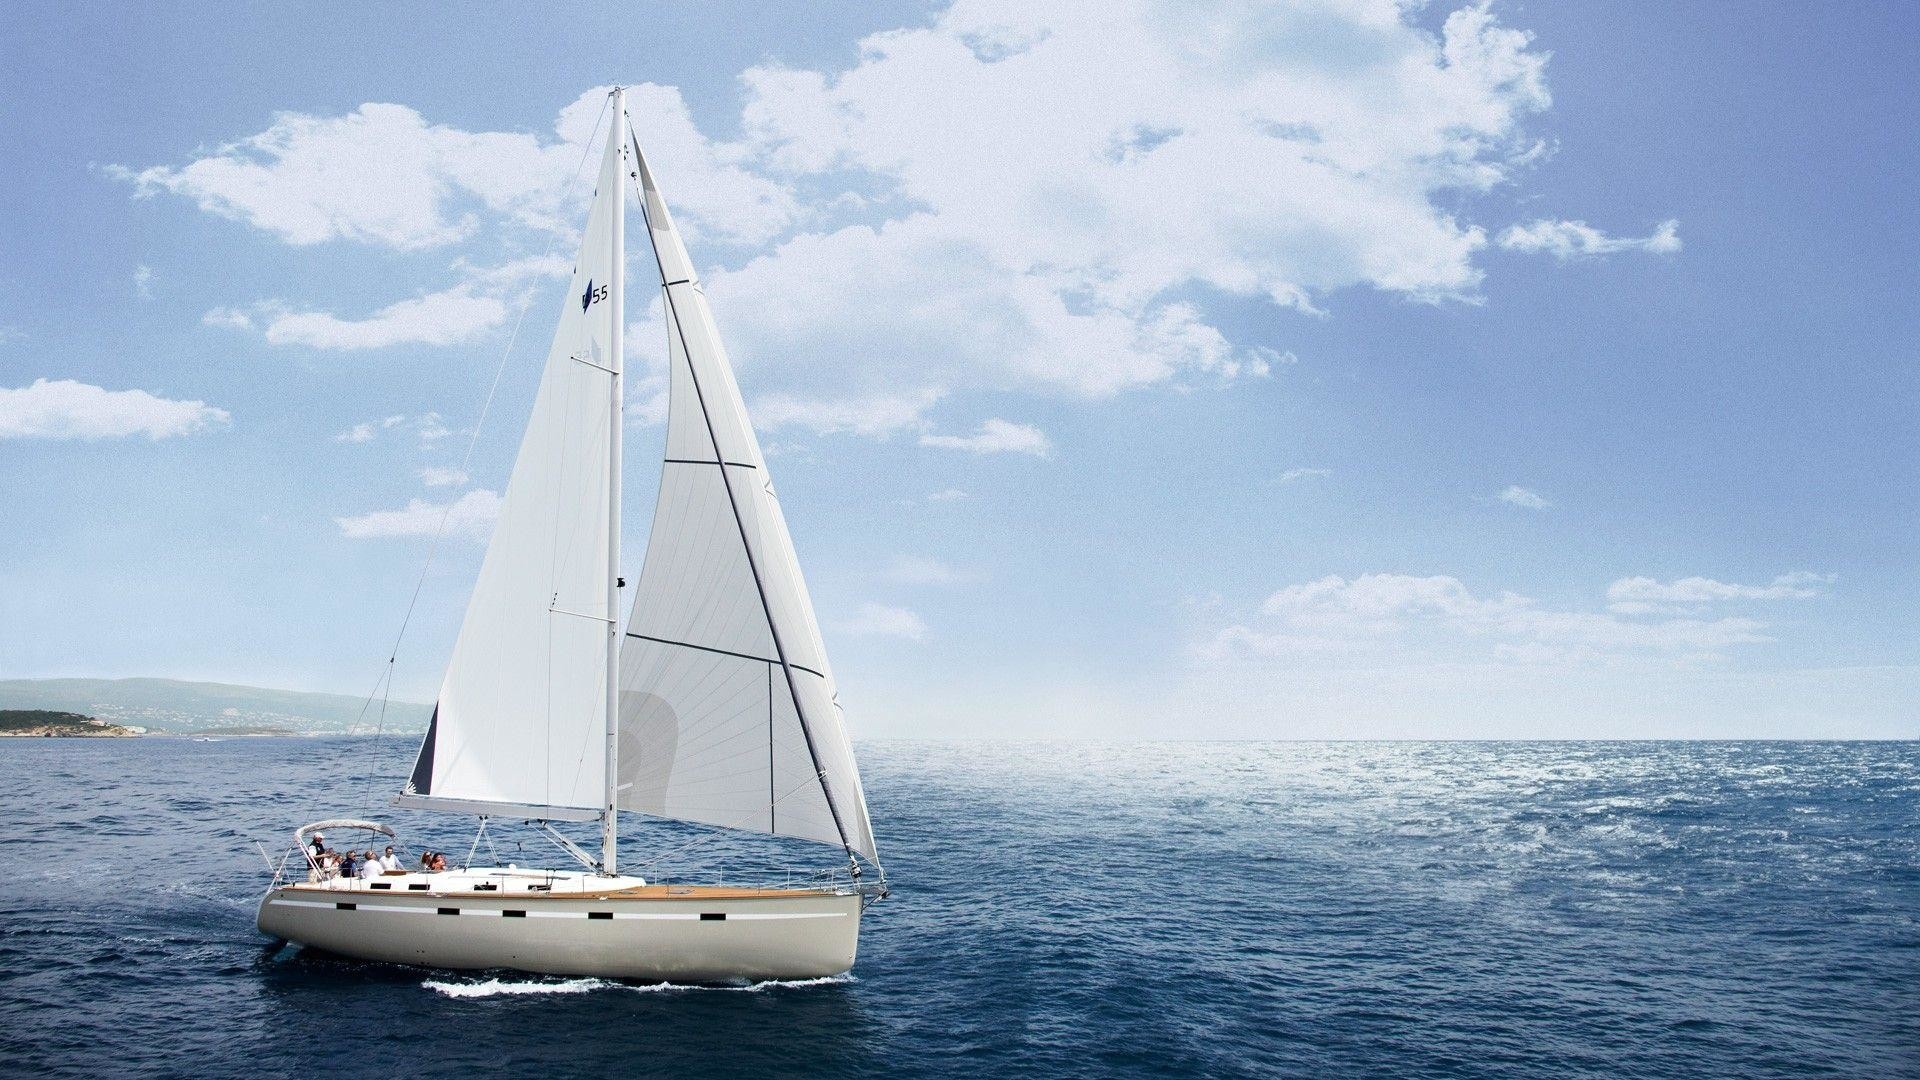 Sail Boat: A cruising yacht, A sea-going vessel propelled by the power of wind. 1920x1080 Full HD Background.